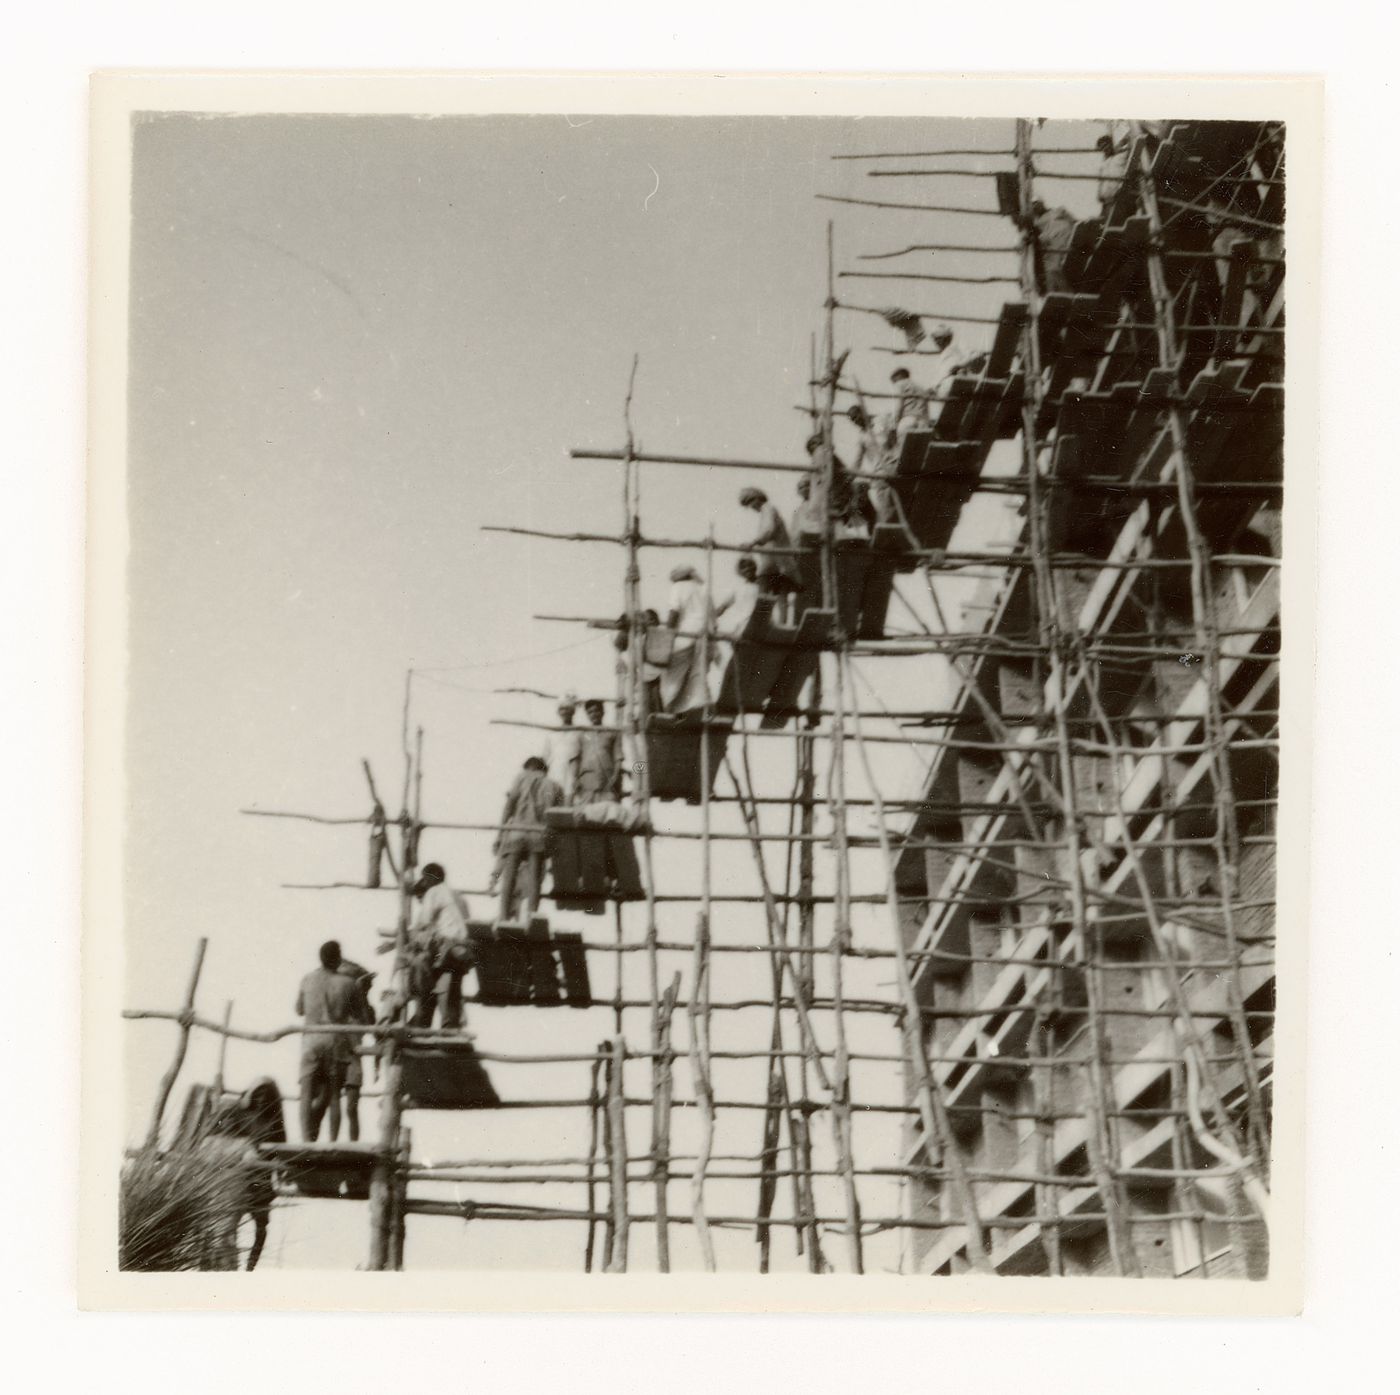 View of construction workers on wooden scaffolding passing on material supplies to upper levels of building, Chandigarh, India